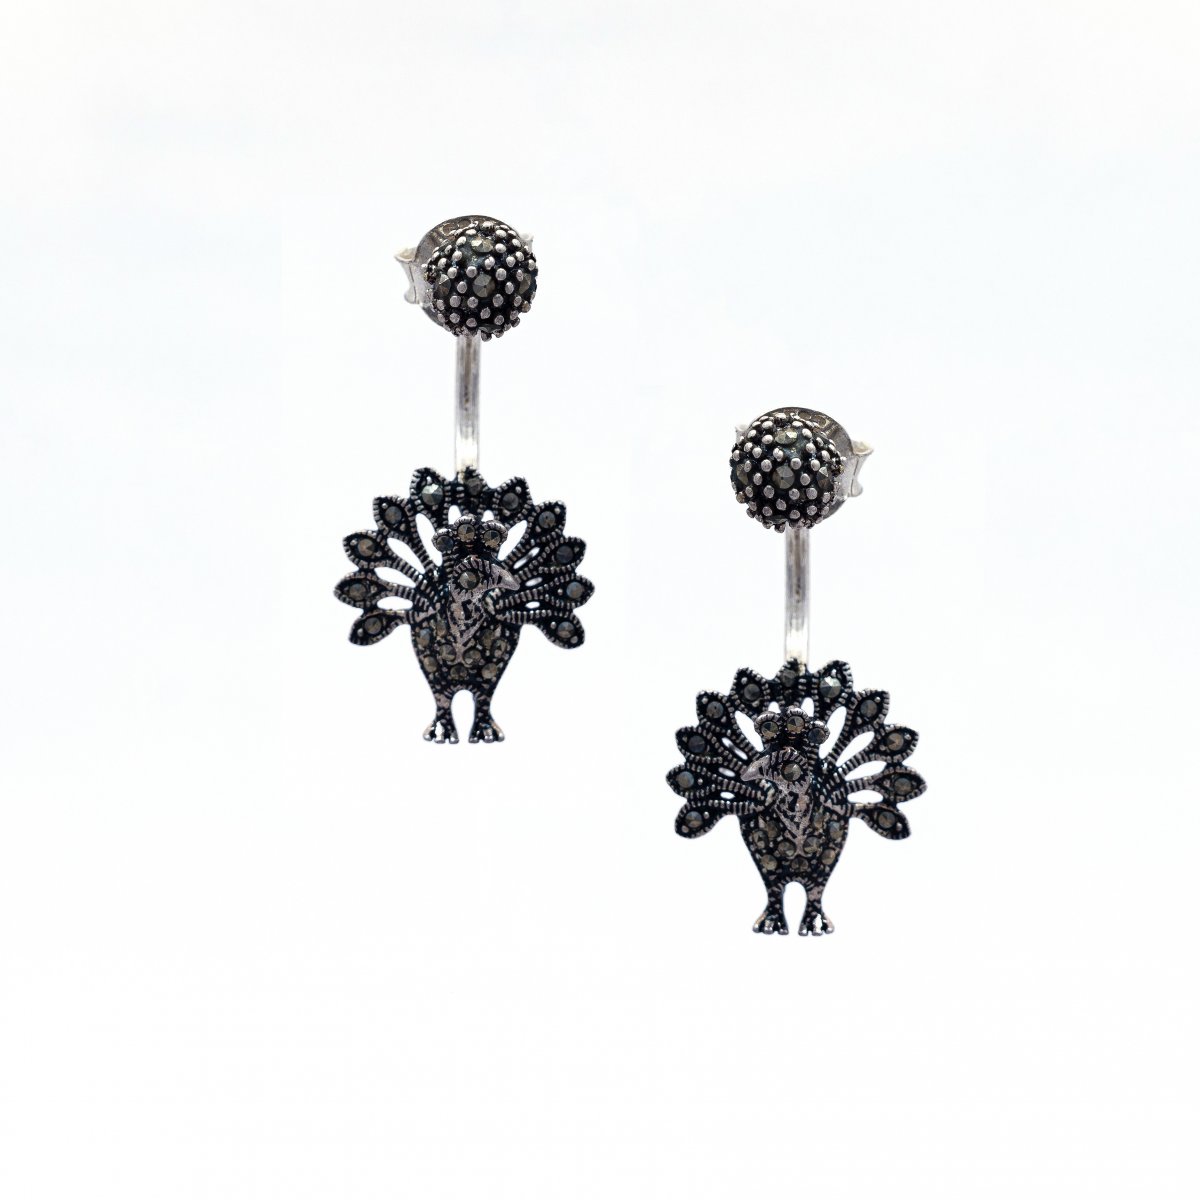 92.5 OXIDISED SILVER STONE JHUMKA EARRINGS FOR WOMEN AND GIRLS